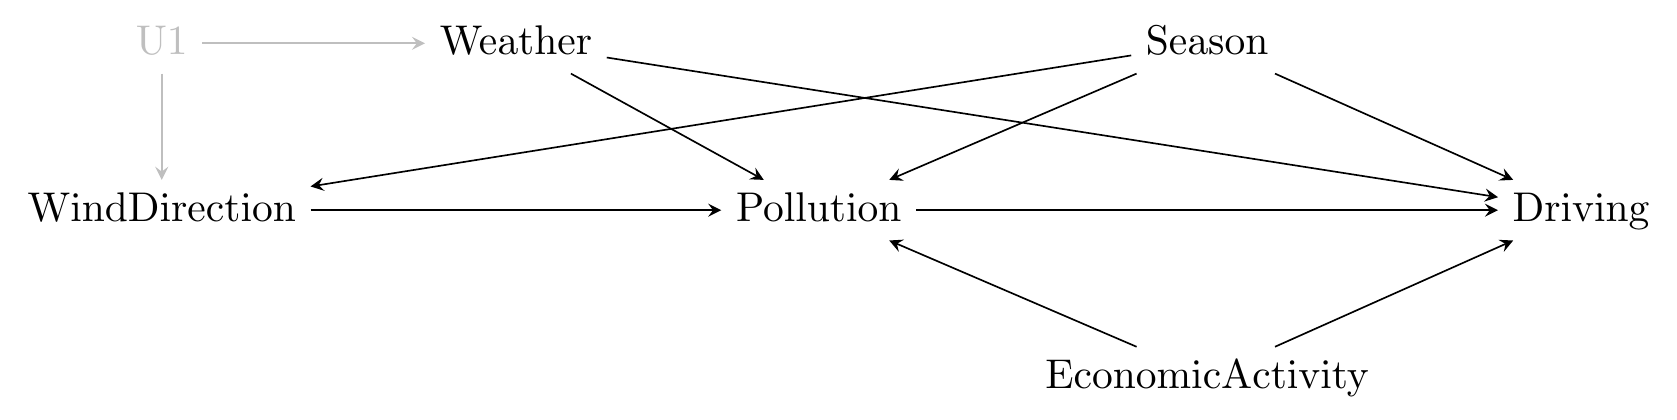 A causal diagram in which U1 causes Weather and Wind Direction, Season causes Wind Direction, Pollution, and Driving, Weather and Econmoic Activity both cause Pollution and Driving, and Wind Direction causes Pollution causes Driving.